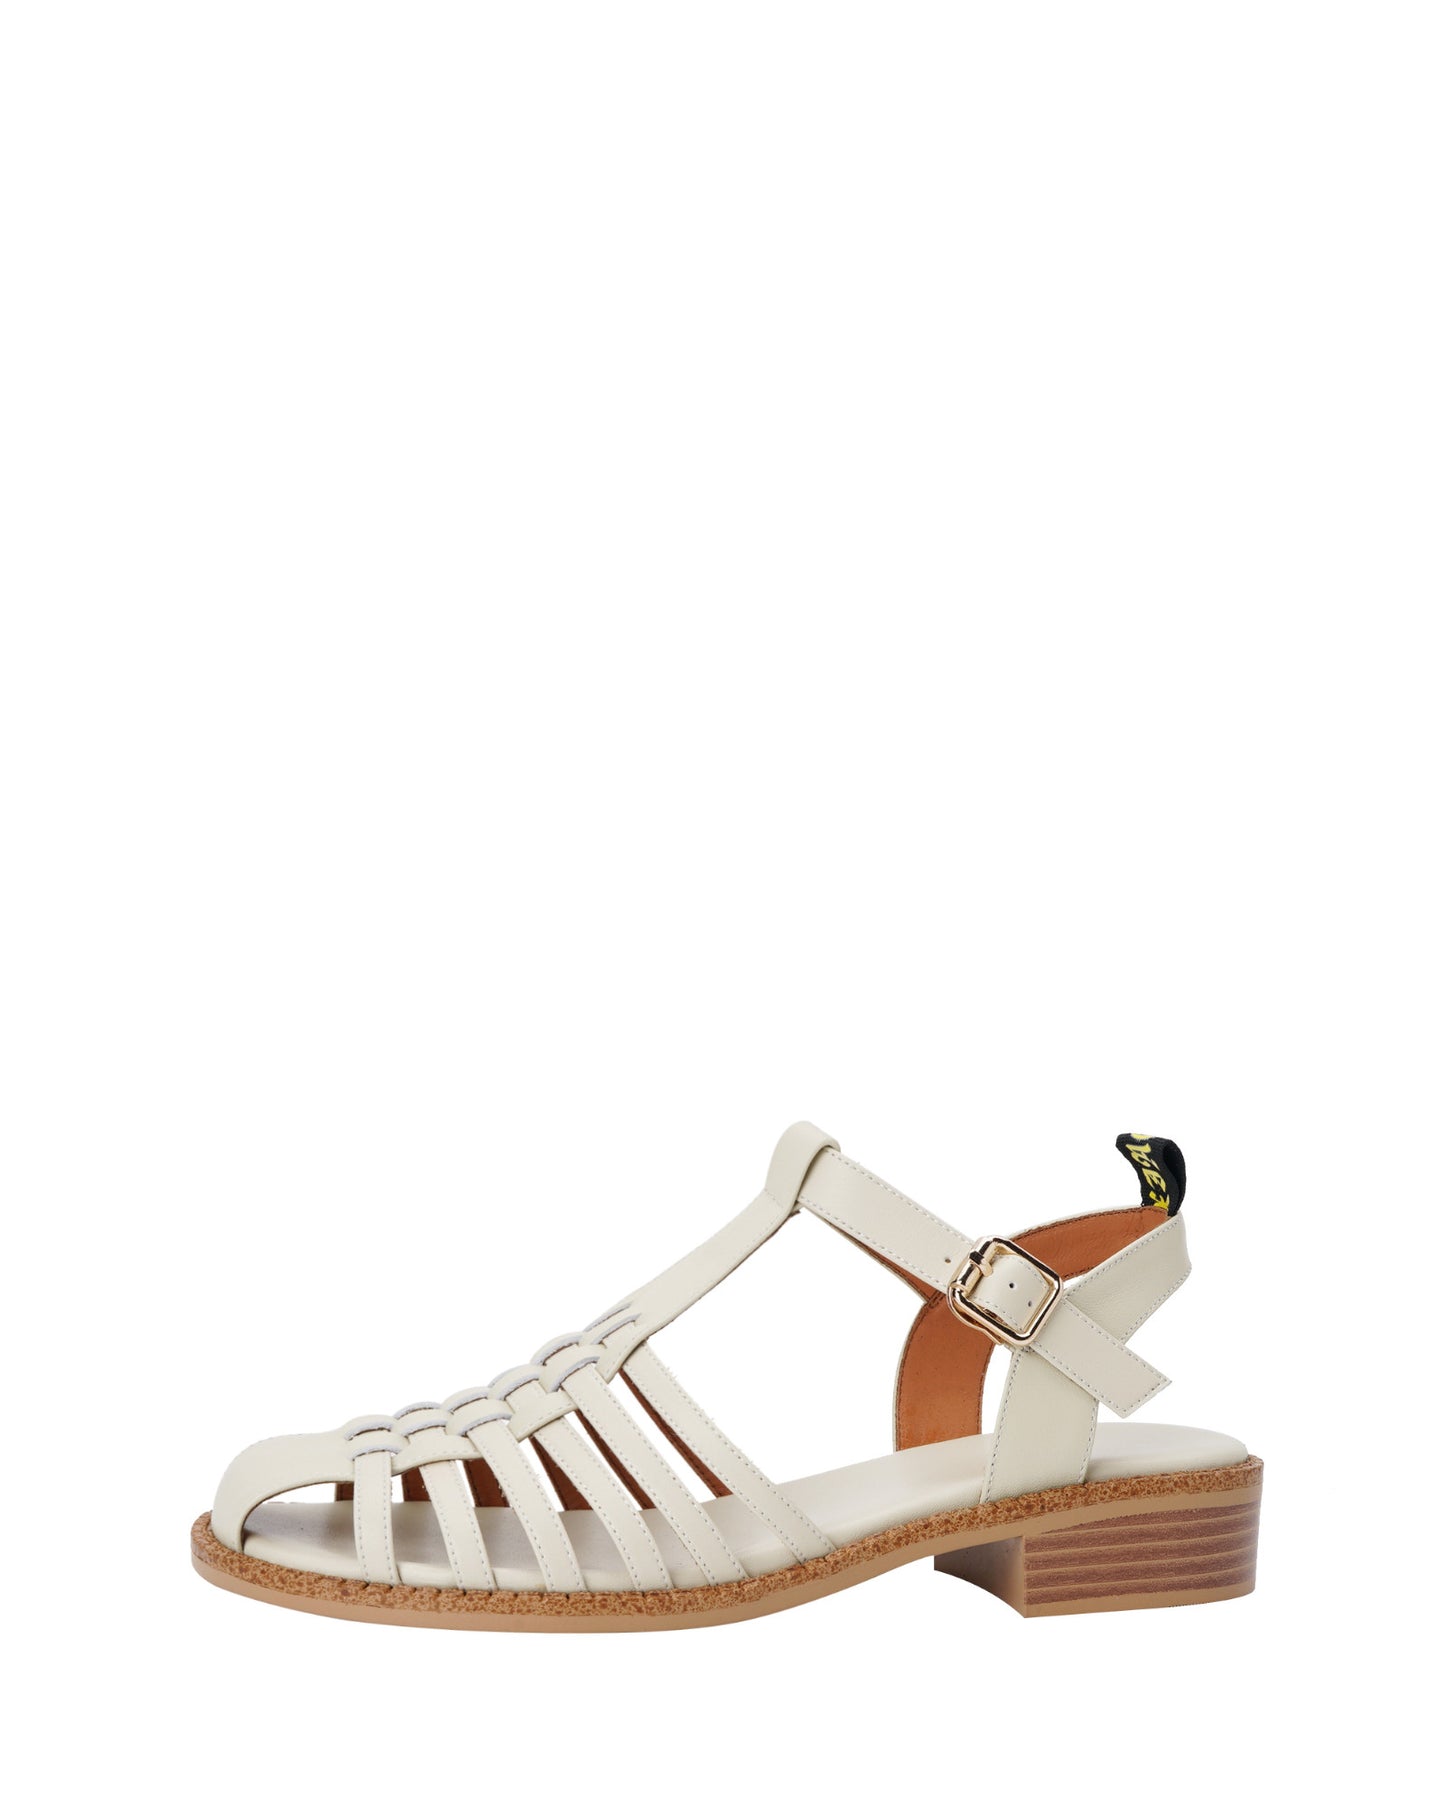 Hilda-woven-leather-sandals-white